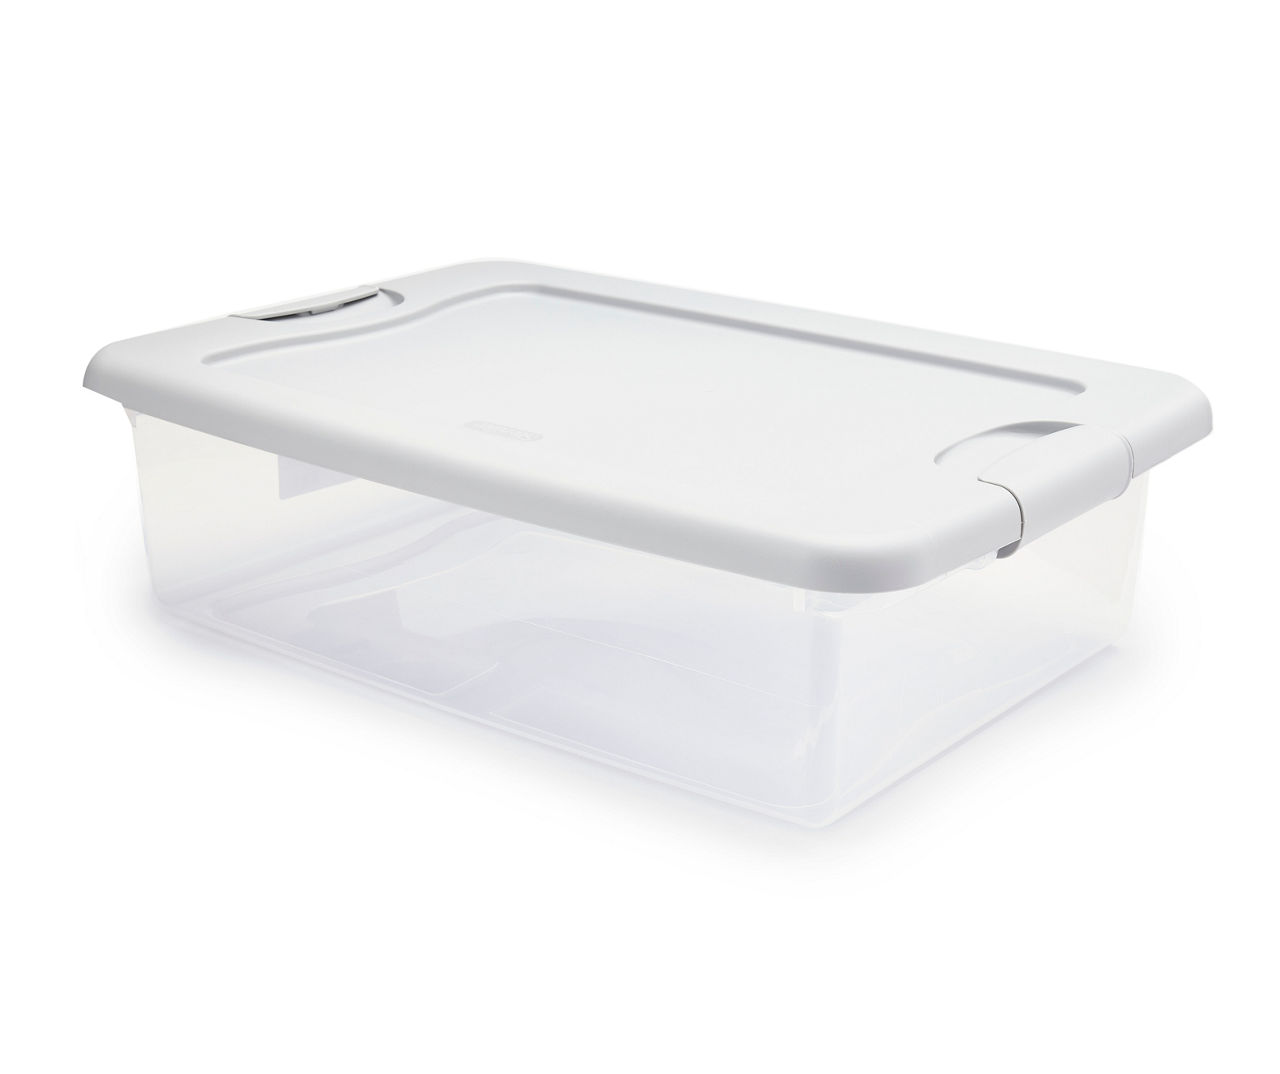 Sterilite Large 32 Qt Home Storage Container Tote with Latching Lids, (4  Pack) - Bed Bath & Beyond - 37180067